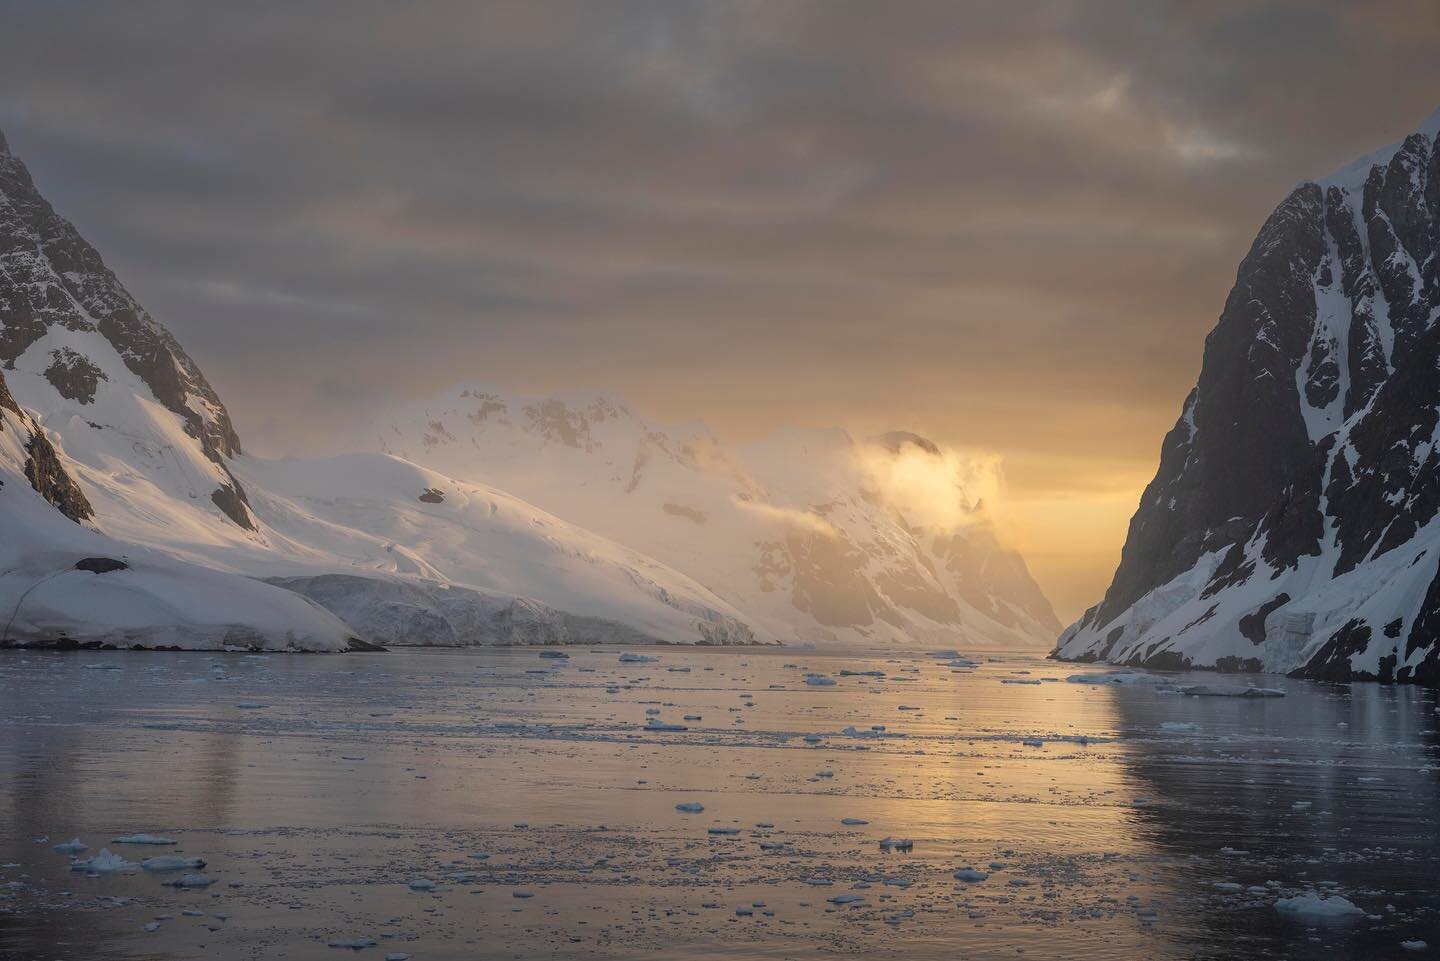 Sunset, Antarctica- the lemaire channel I think!
Sooooo peaceful #antarctica #sunset #landscapephotography